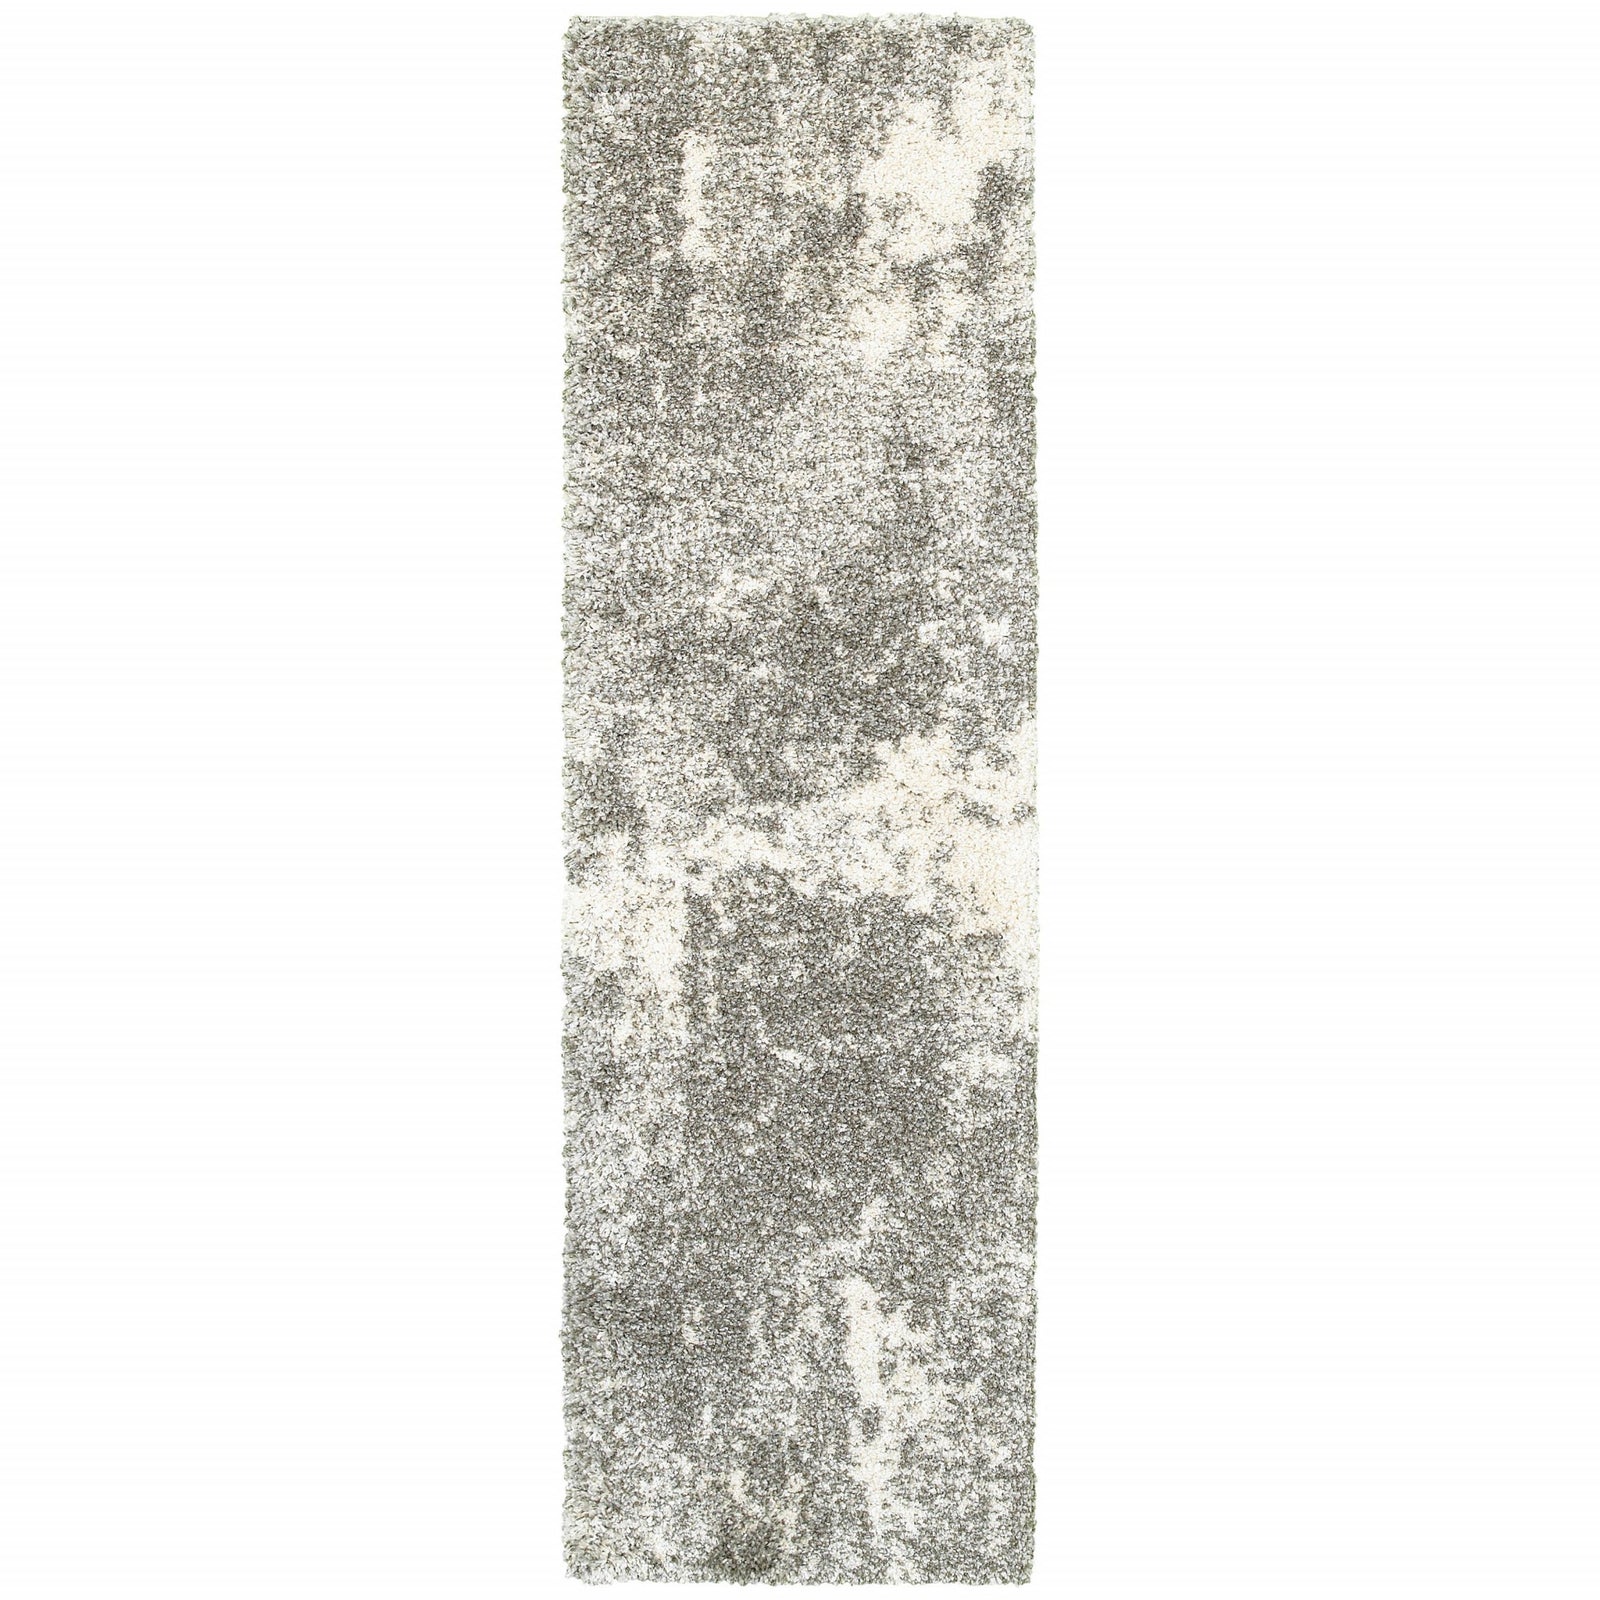 2’ X 3’ Gray And Ivory Distressed Abstract Scatter Rug